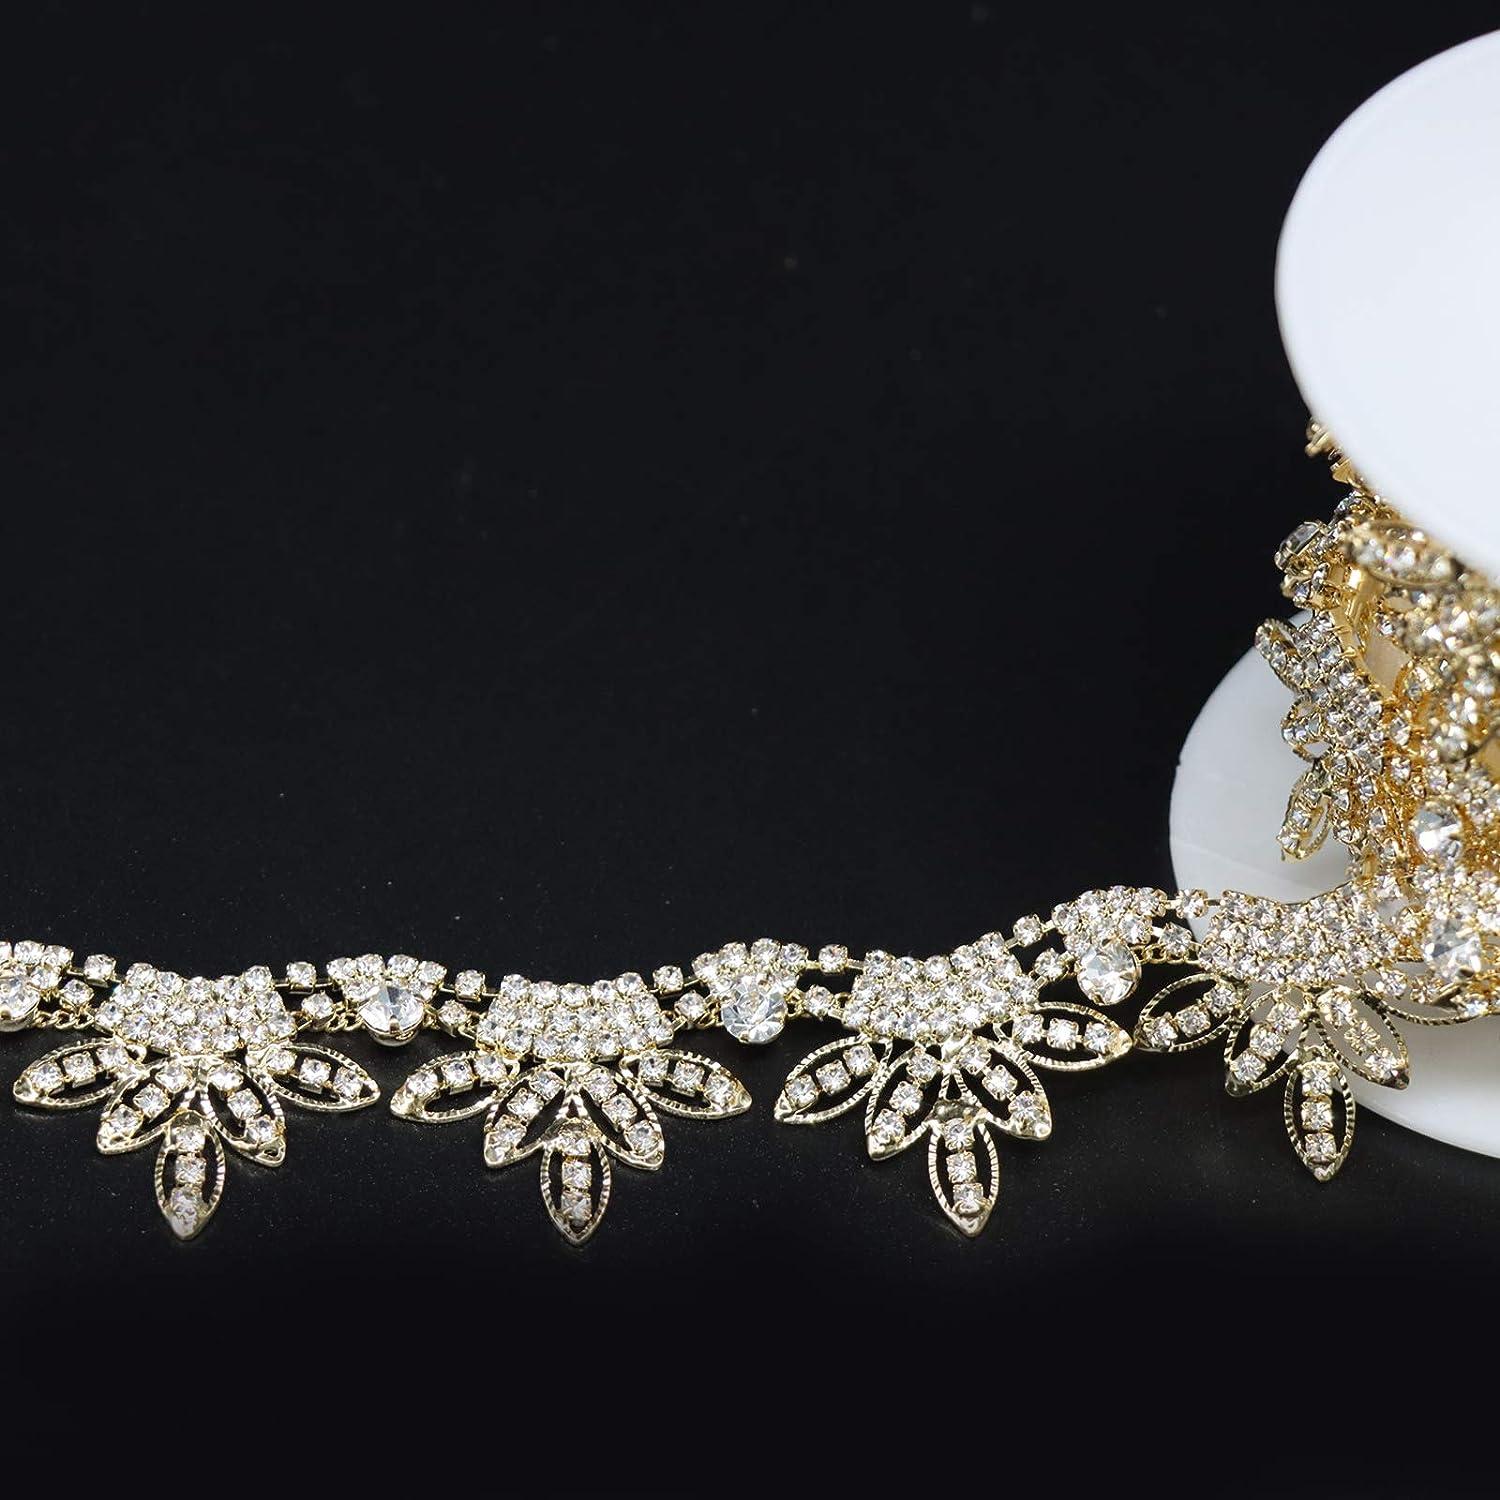 Perial Co Gold Rhinestone Fringe Trim Sold by the Yard 18 inches Wide